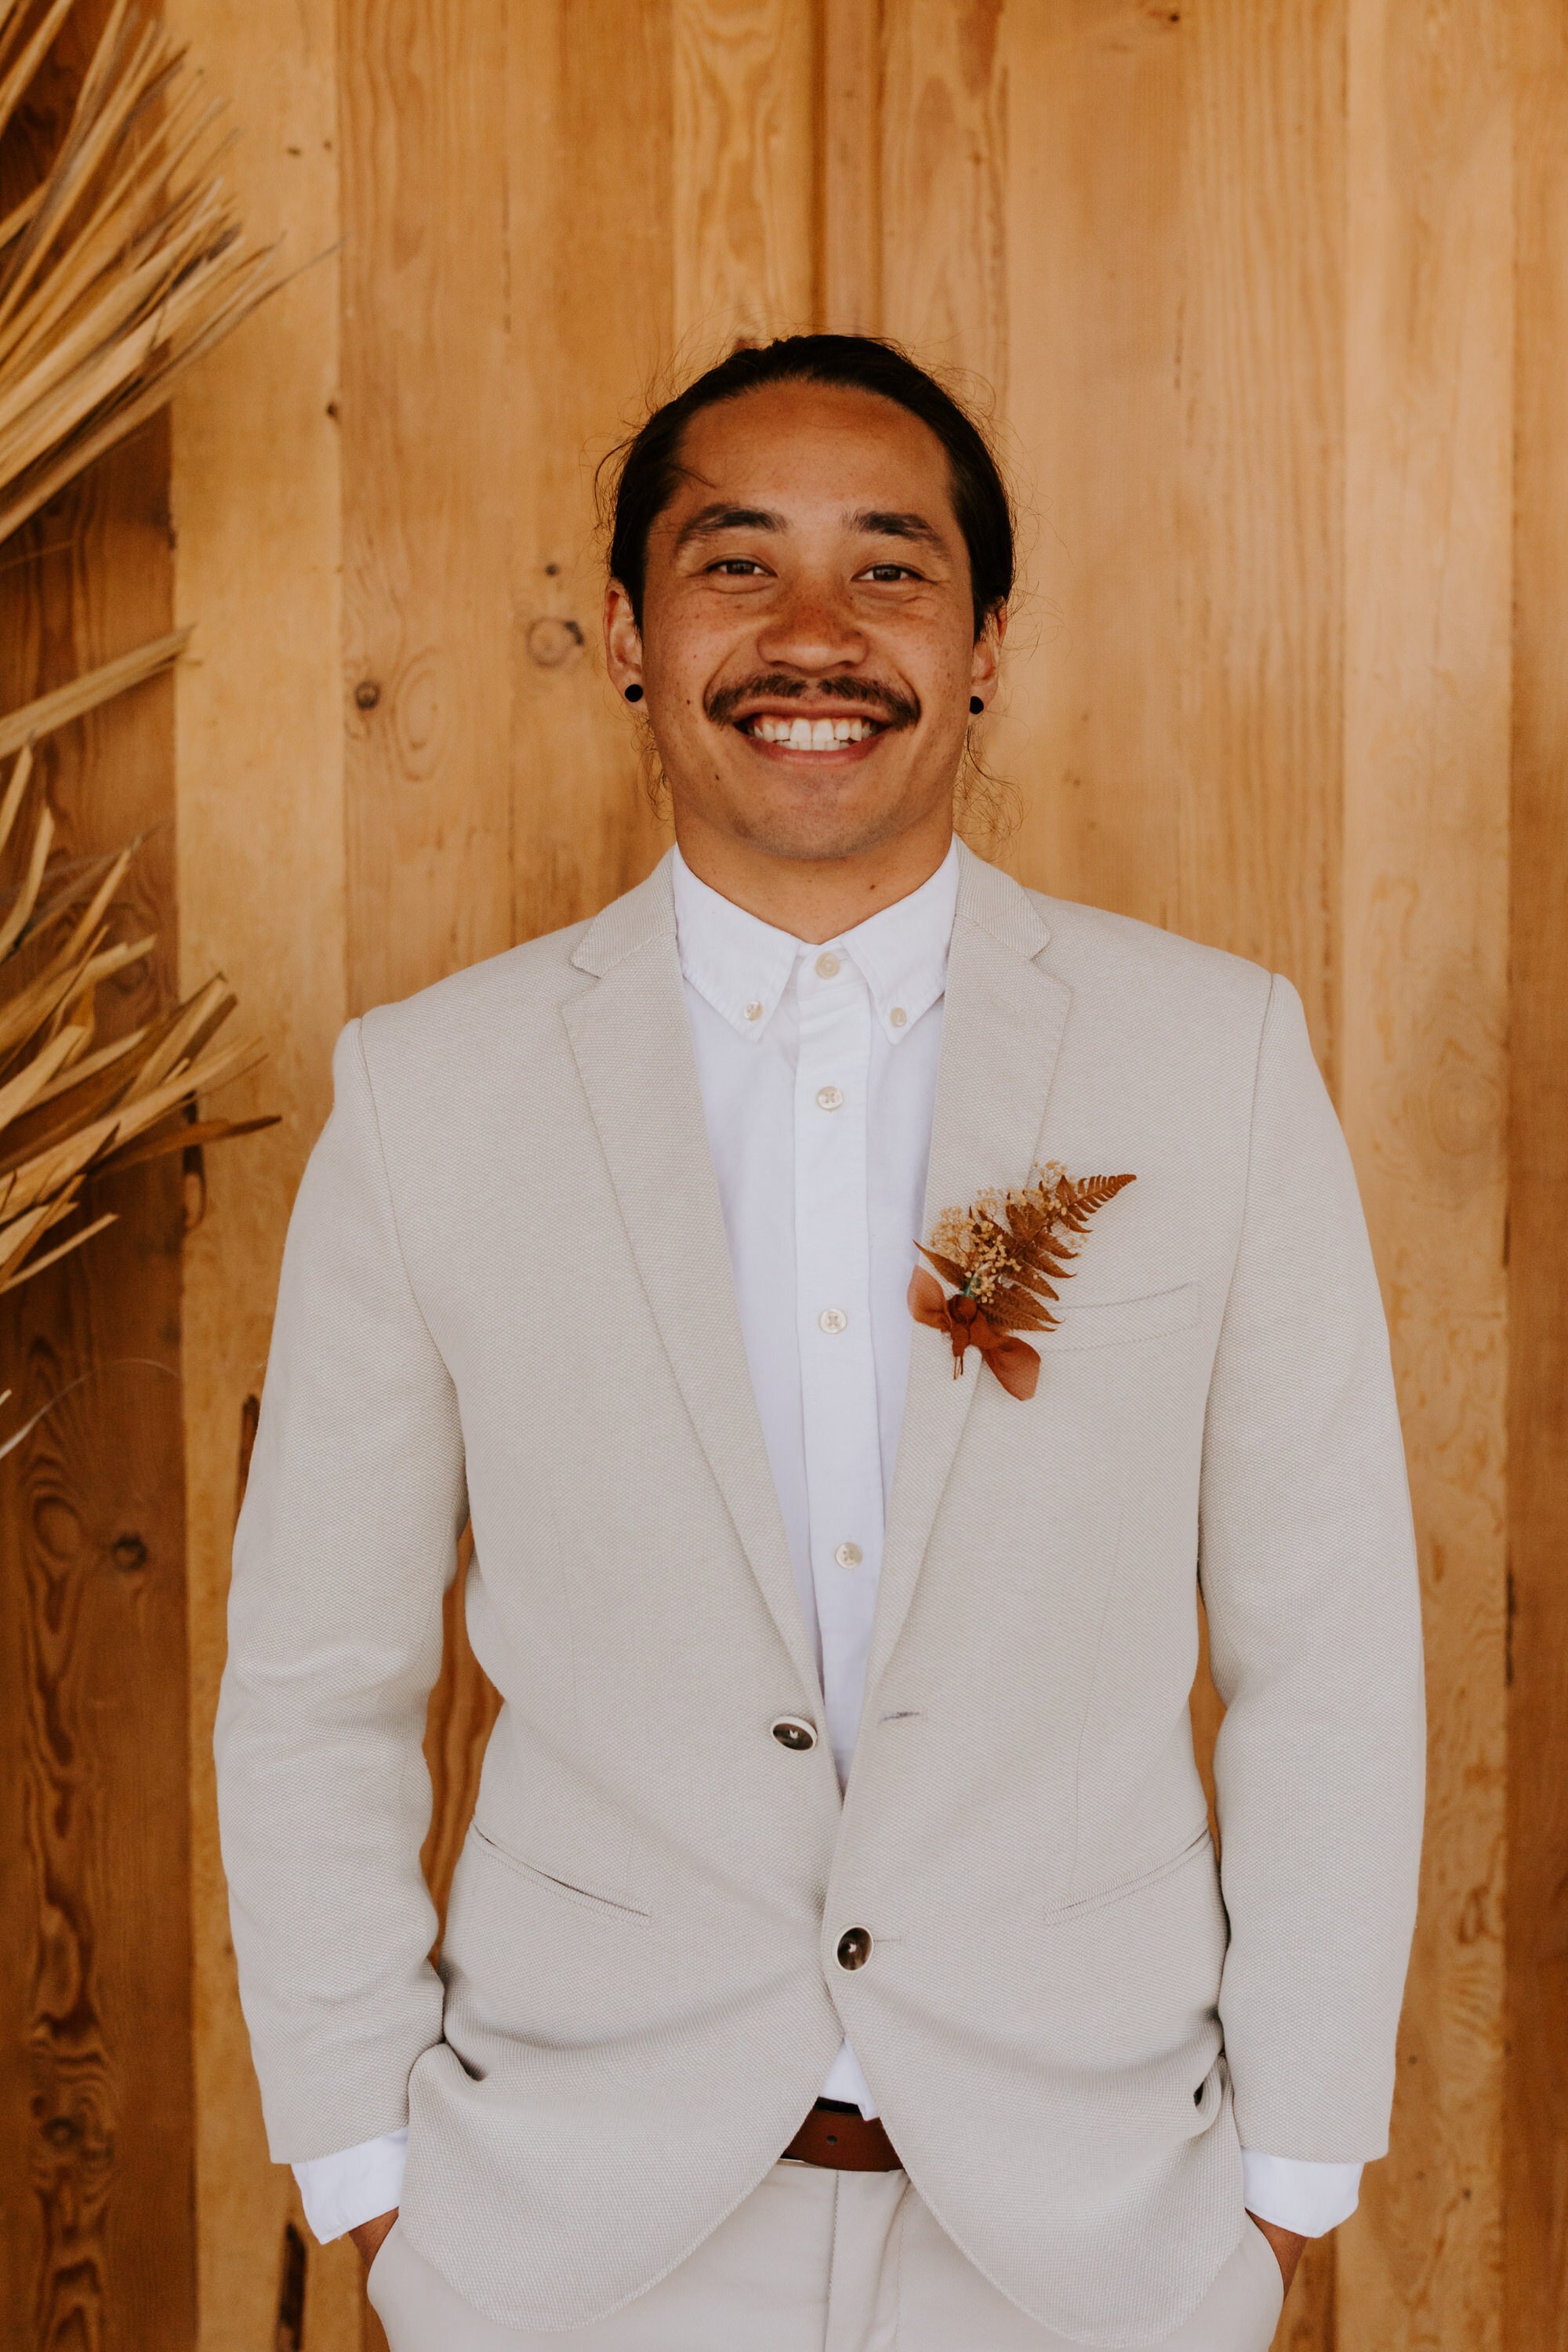 Groom with cream suit and rust boutonniere | Boho Joshua Tree elopement at Desert Wild JT airbnb | Dried palm leaves, pampas grass, neutral rust florals | Tida Svy | www.tidasvy.com